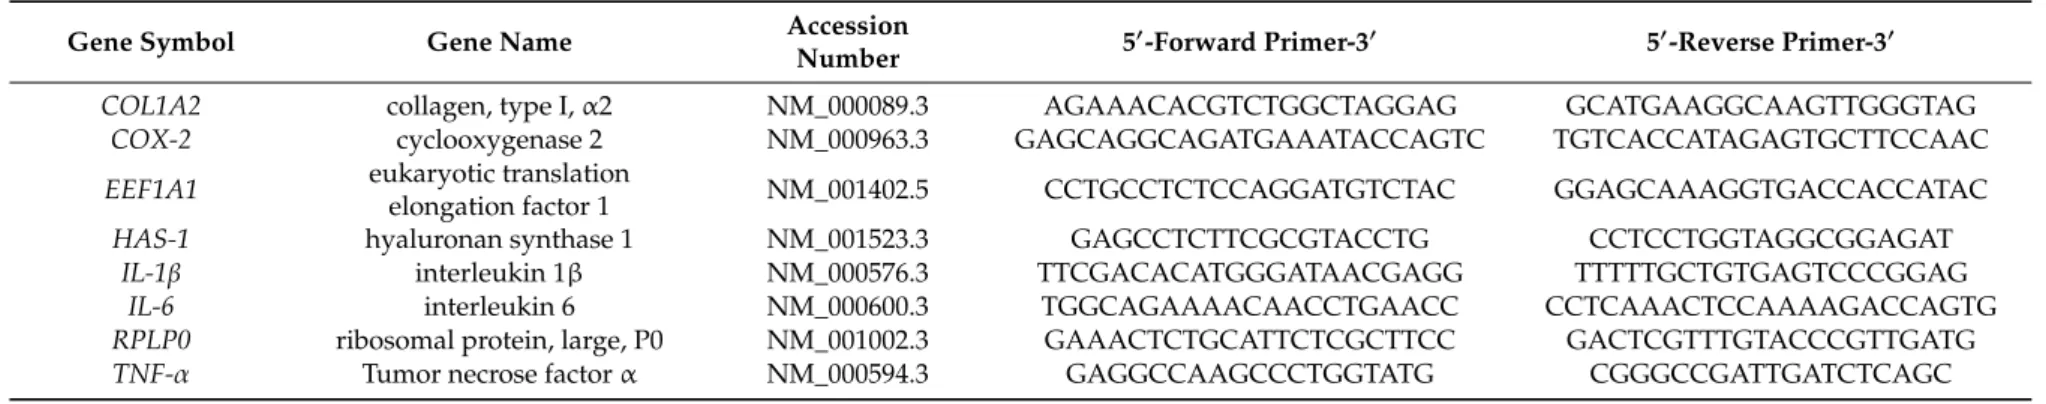 Table 1. Reference genes (EEF1A1, RPLP0) and targets used for RT-qPCR in human synovial fibroblasts.